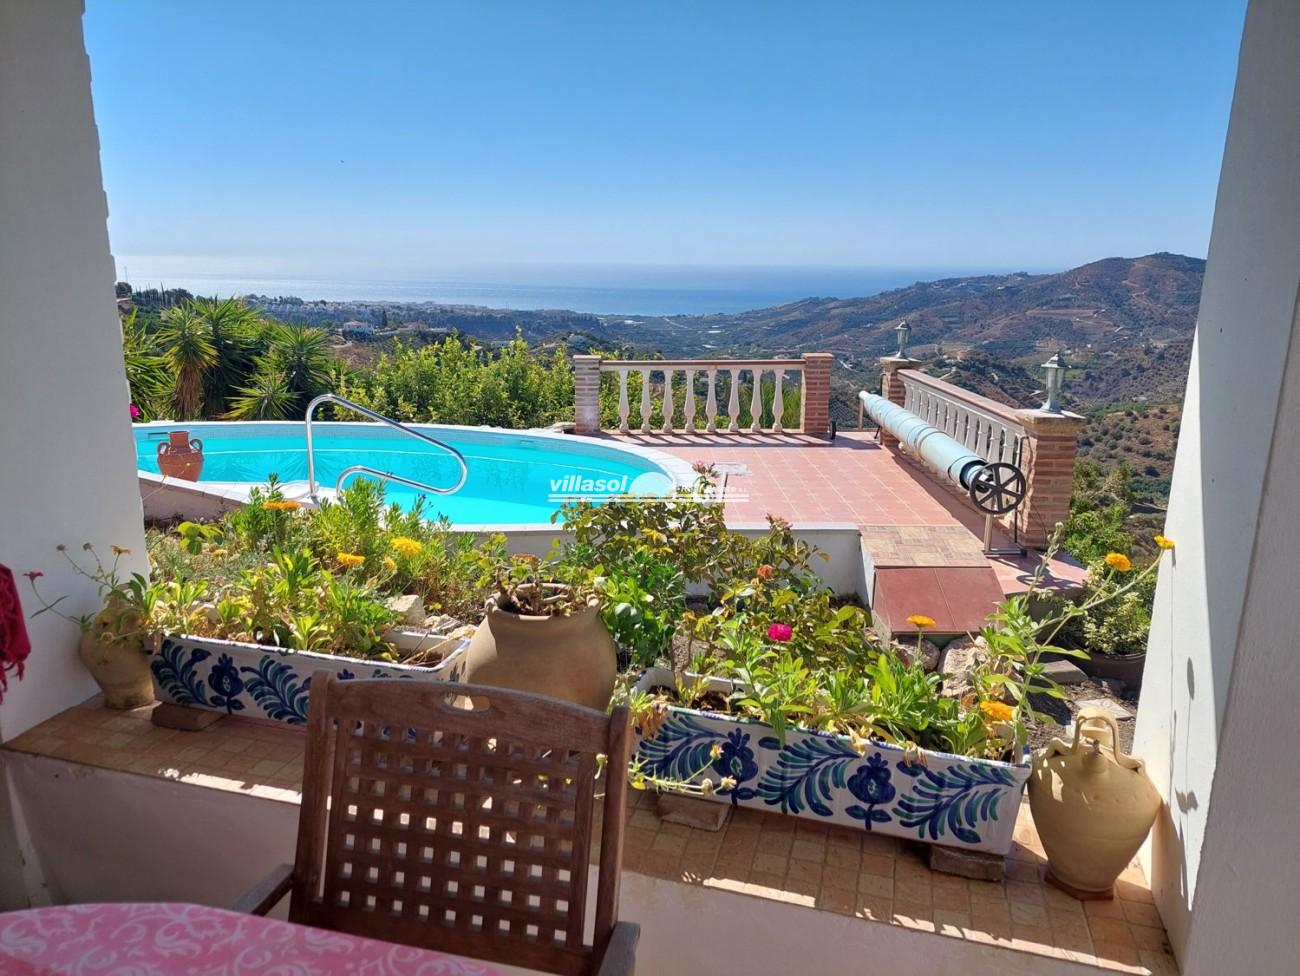 A lovely Andalusian style detached villa